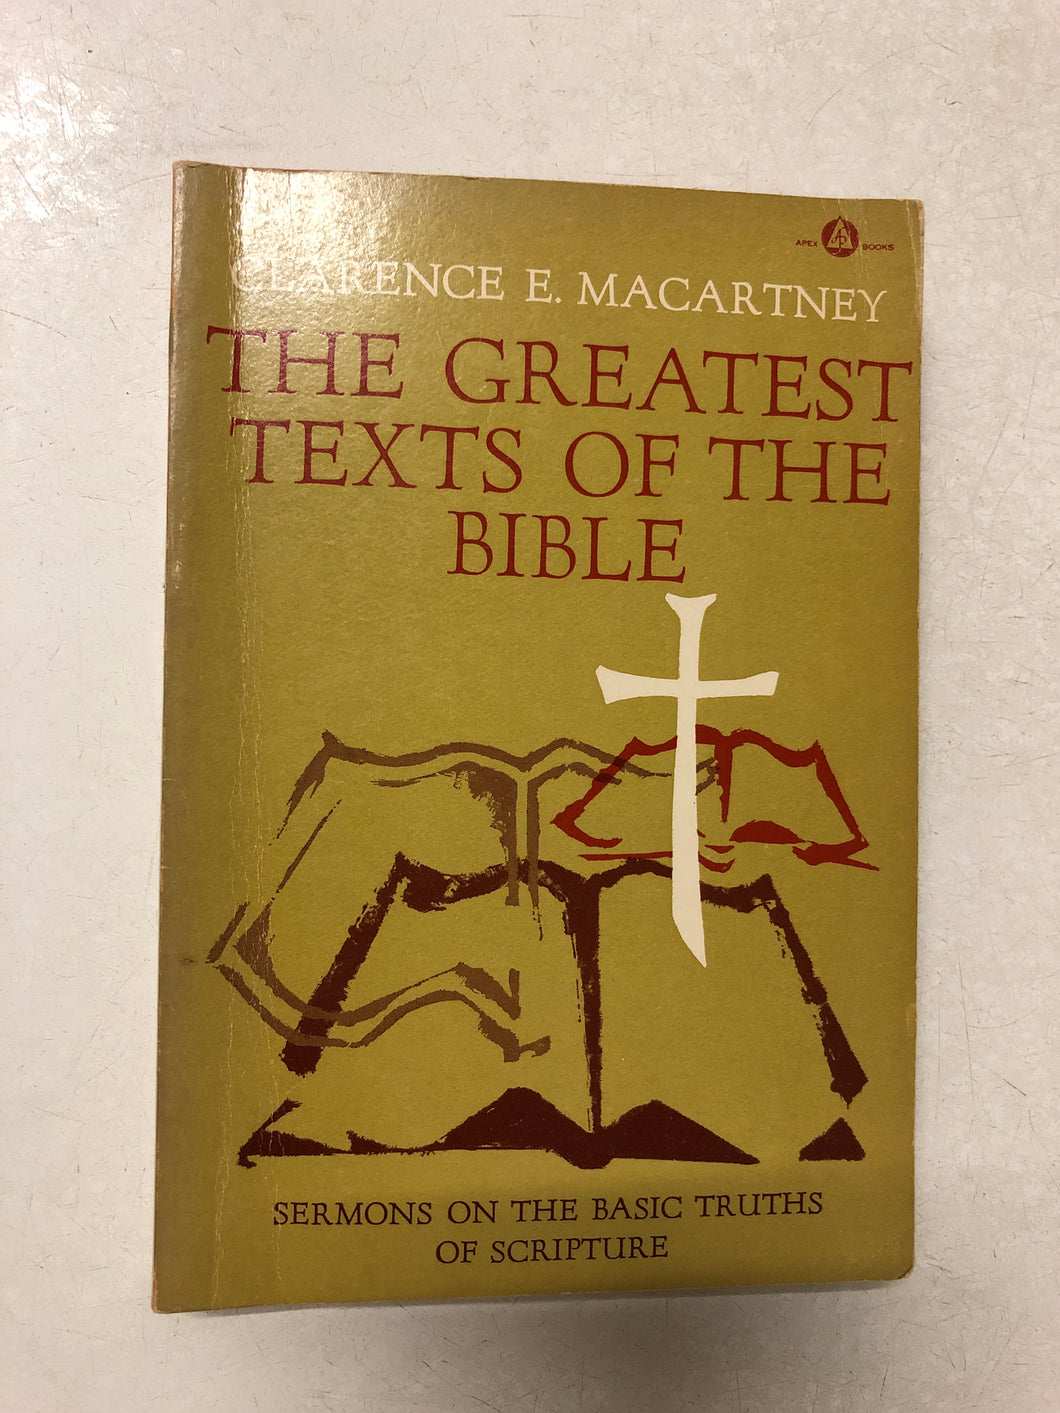 The Greatest Texts of the Bible - Slick Cat Books 